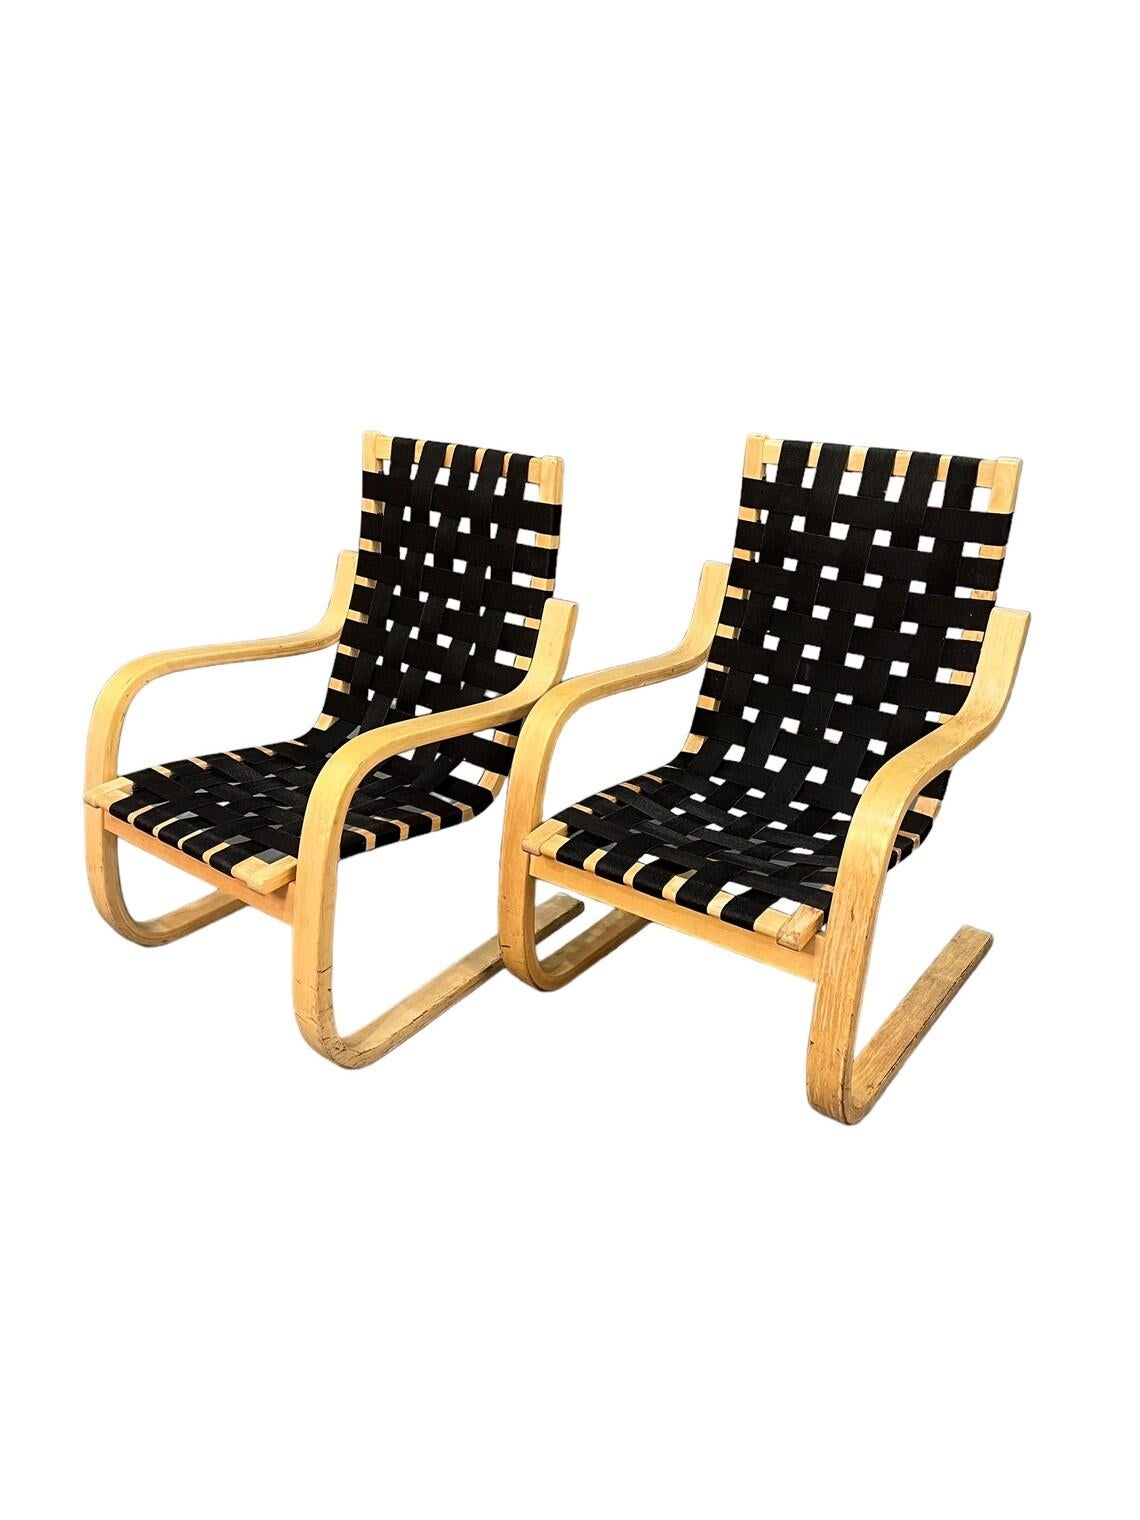 Mid Century Bentwood, Maple lounge chairs with black canvas grid/ stripes
1960s circa
Good condition, considering age and use